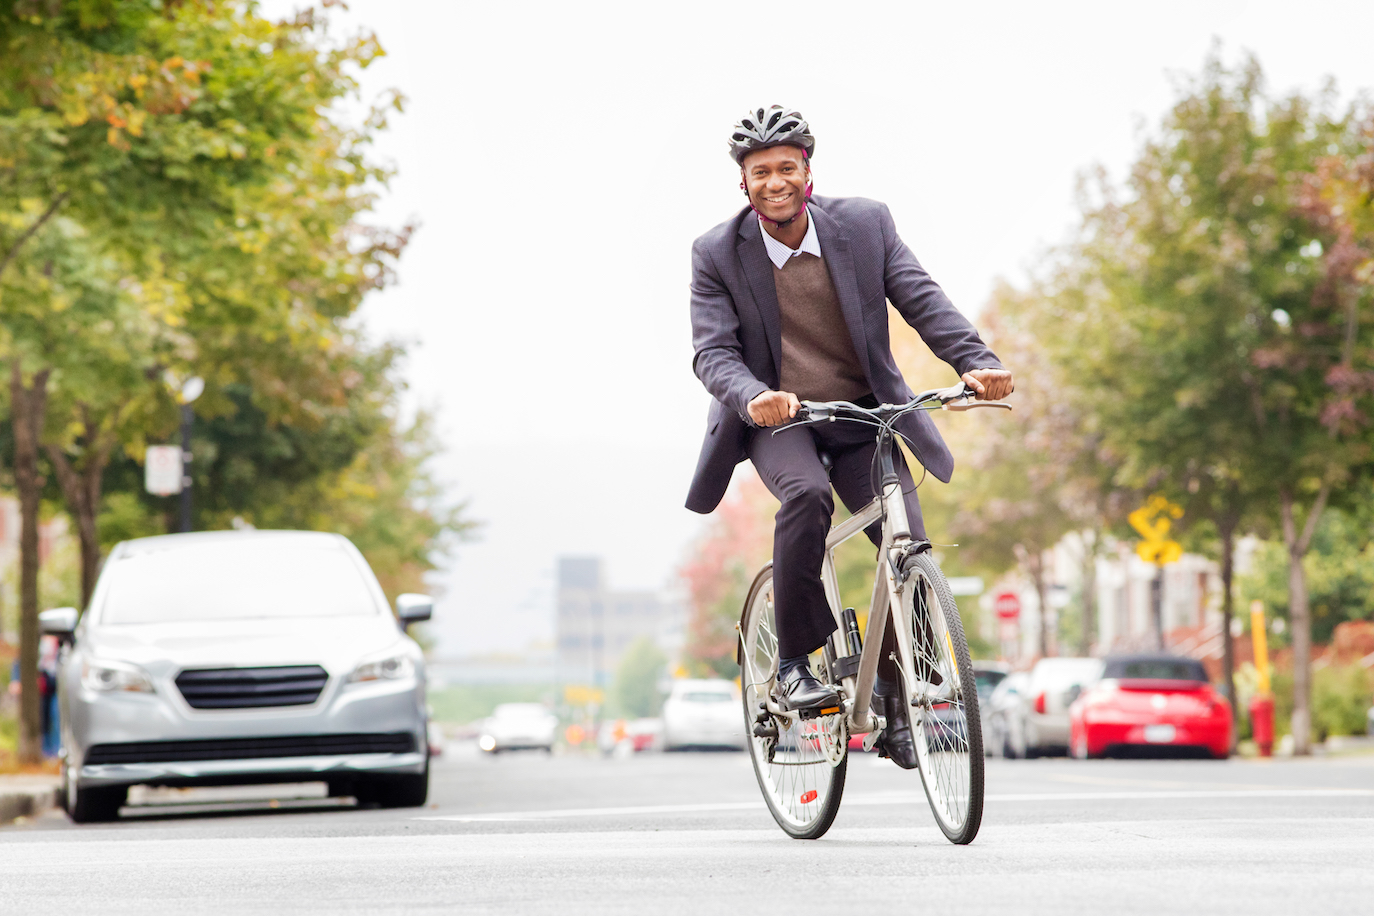 Single black male in his 30s smiling while commuting to work by bicycle